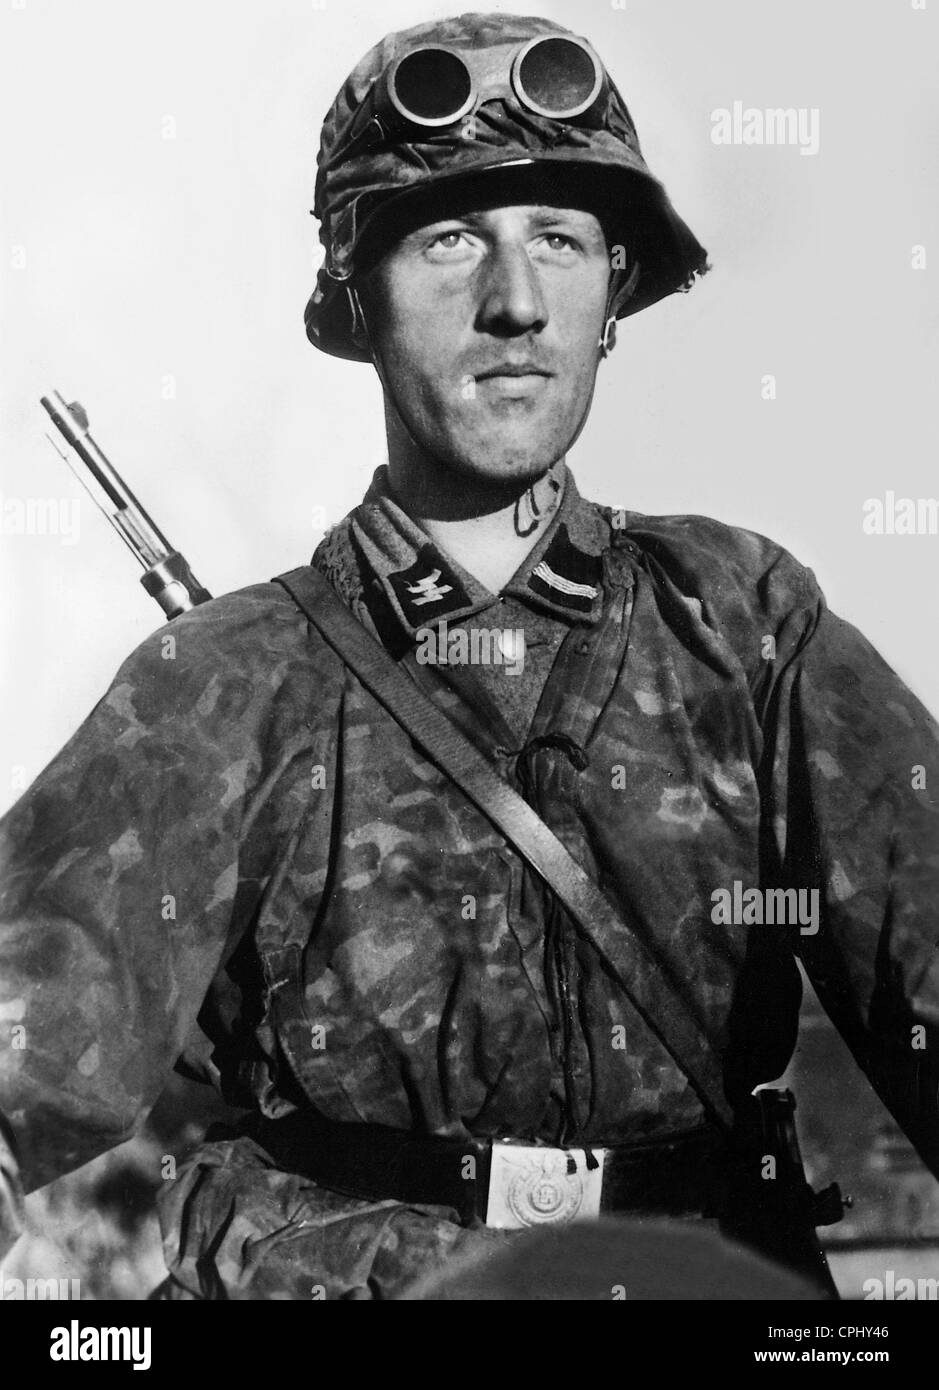 Danish SS soldier on the Eastern Front, 1941 Stock Photo